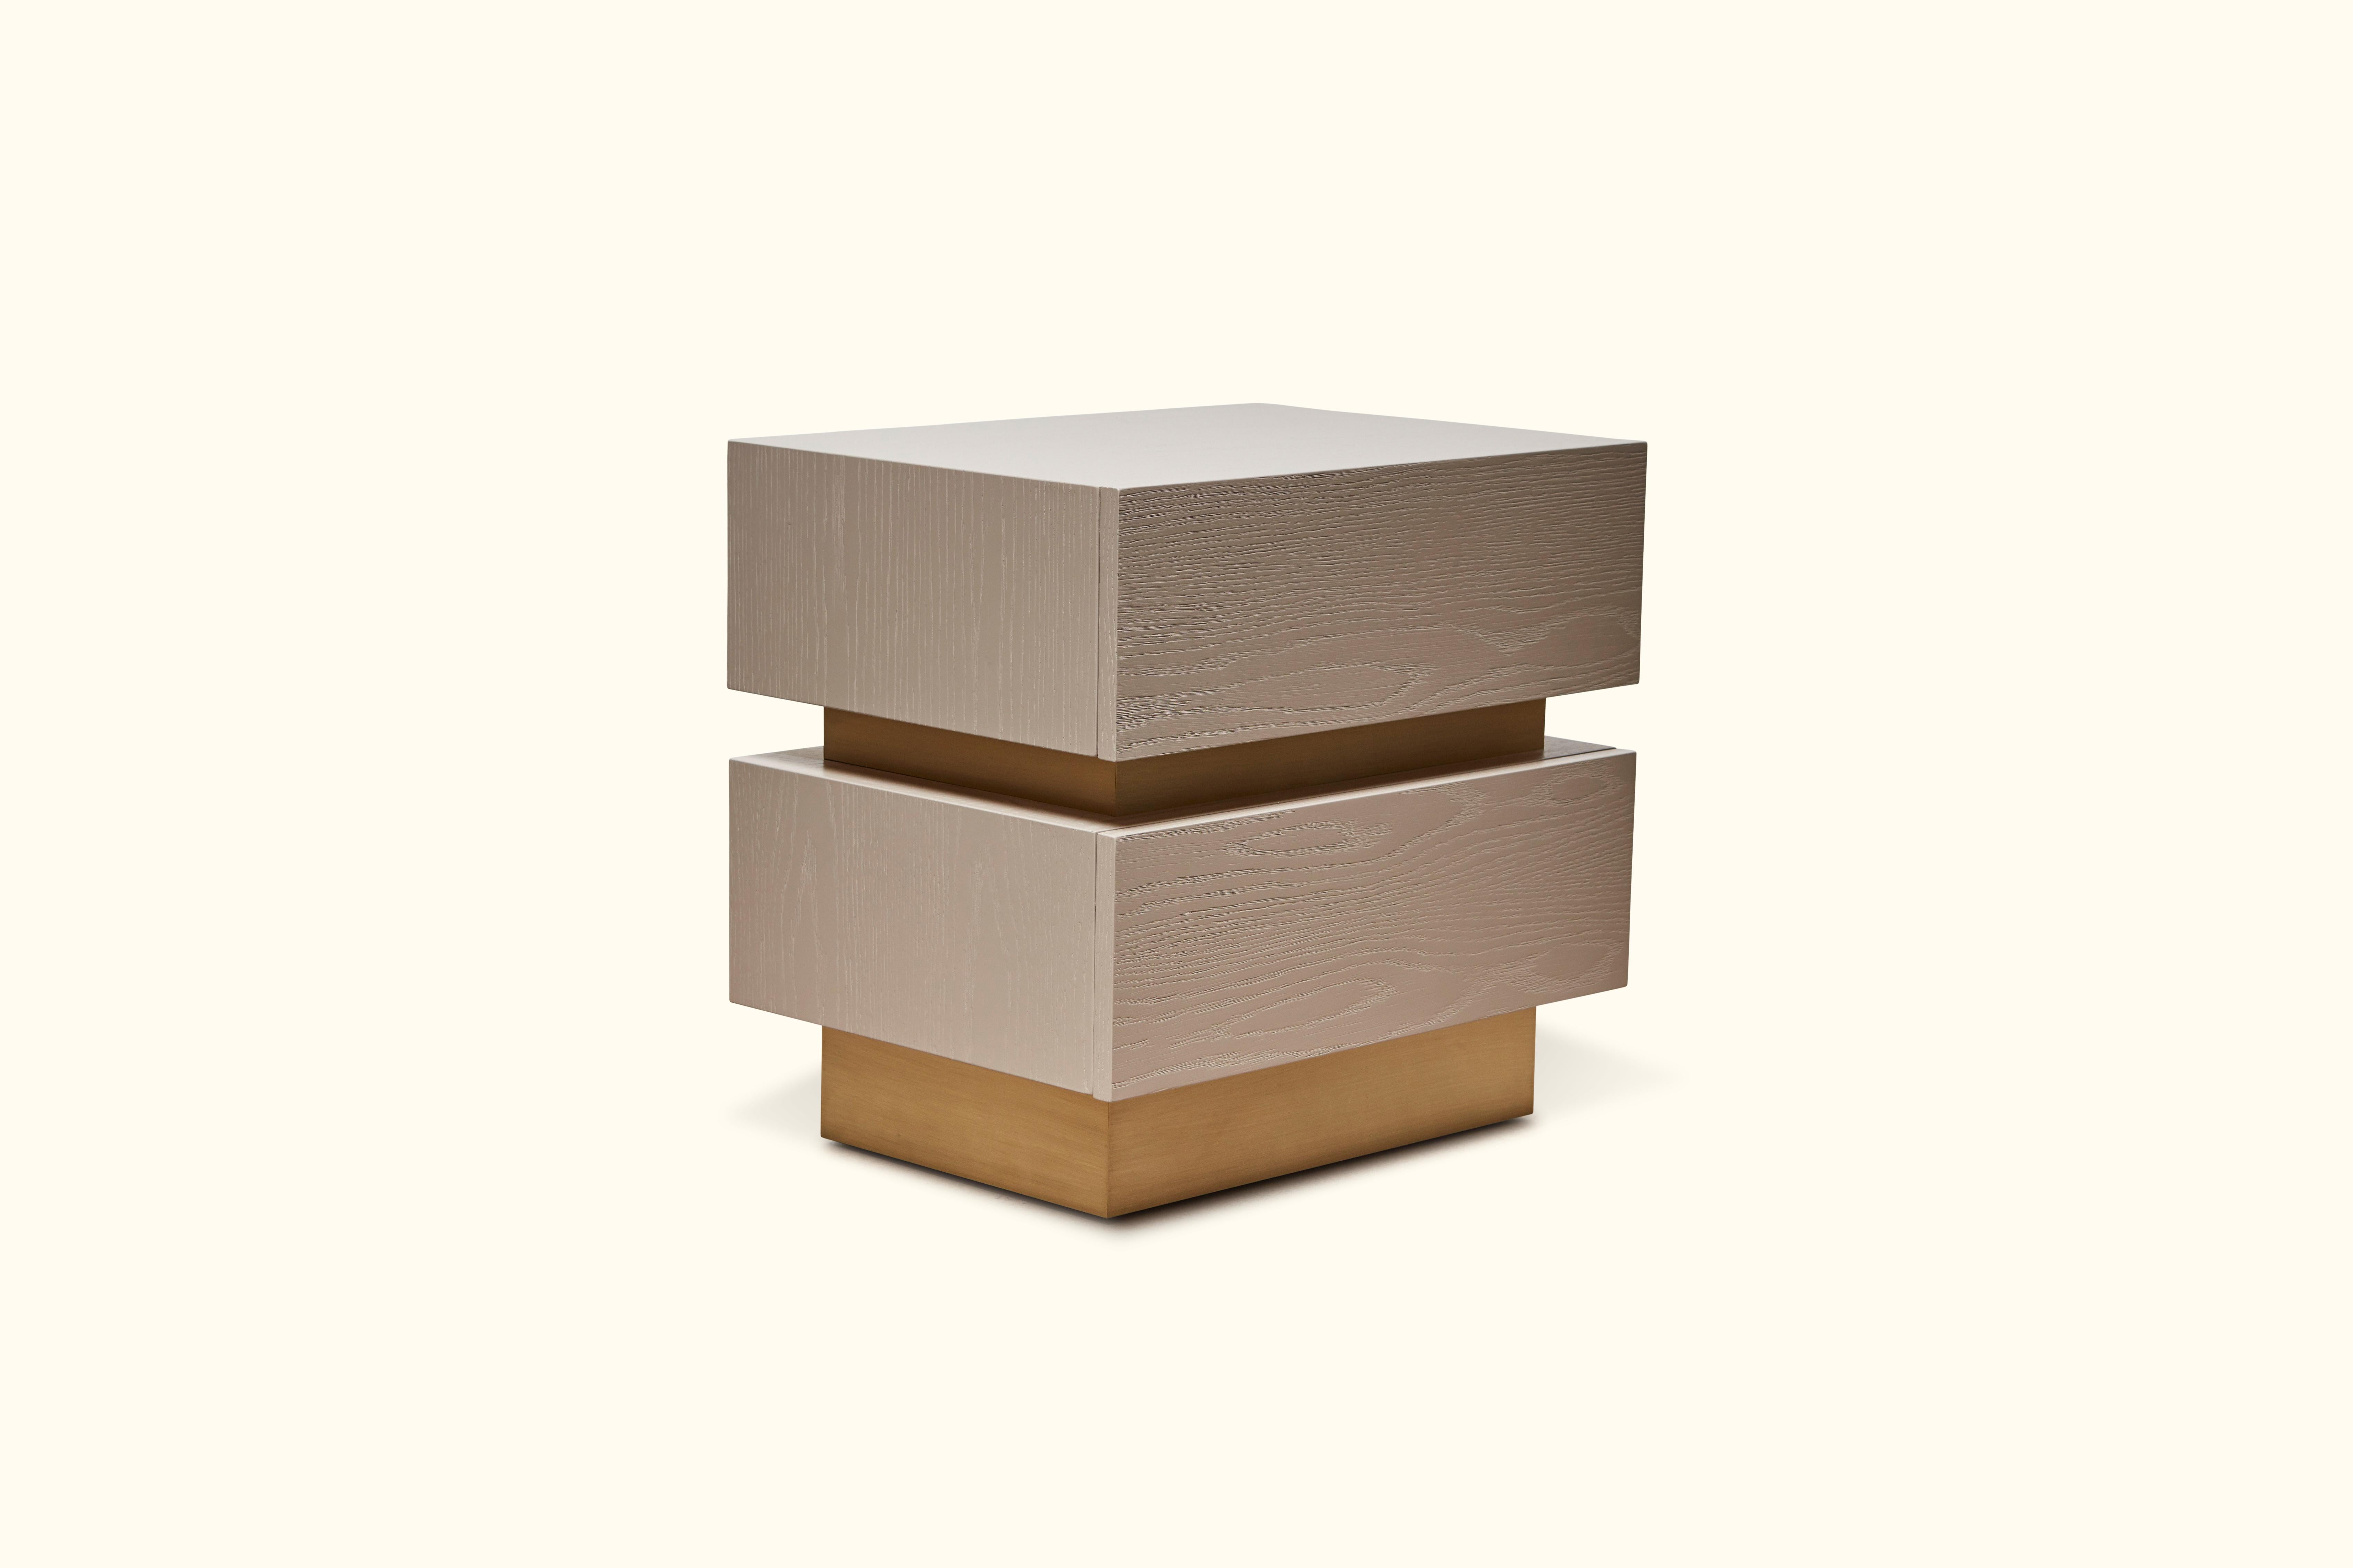 The stacked box nightstand with brass inset is a bedside table with two drawers that is available in various finishes of American walnut, or white oak and features a brass inset detail between the drawers. Show here in rocky beach pigmented oak and